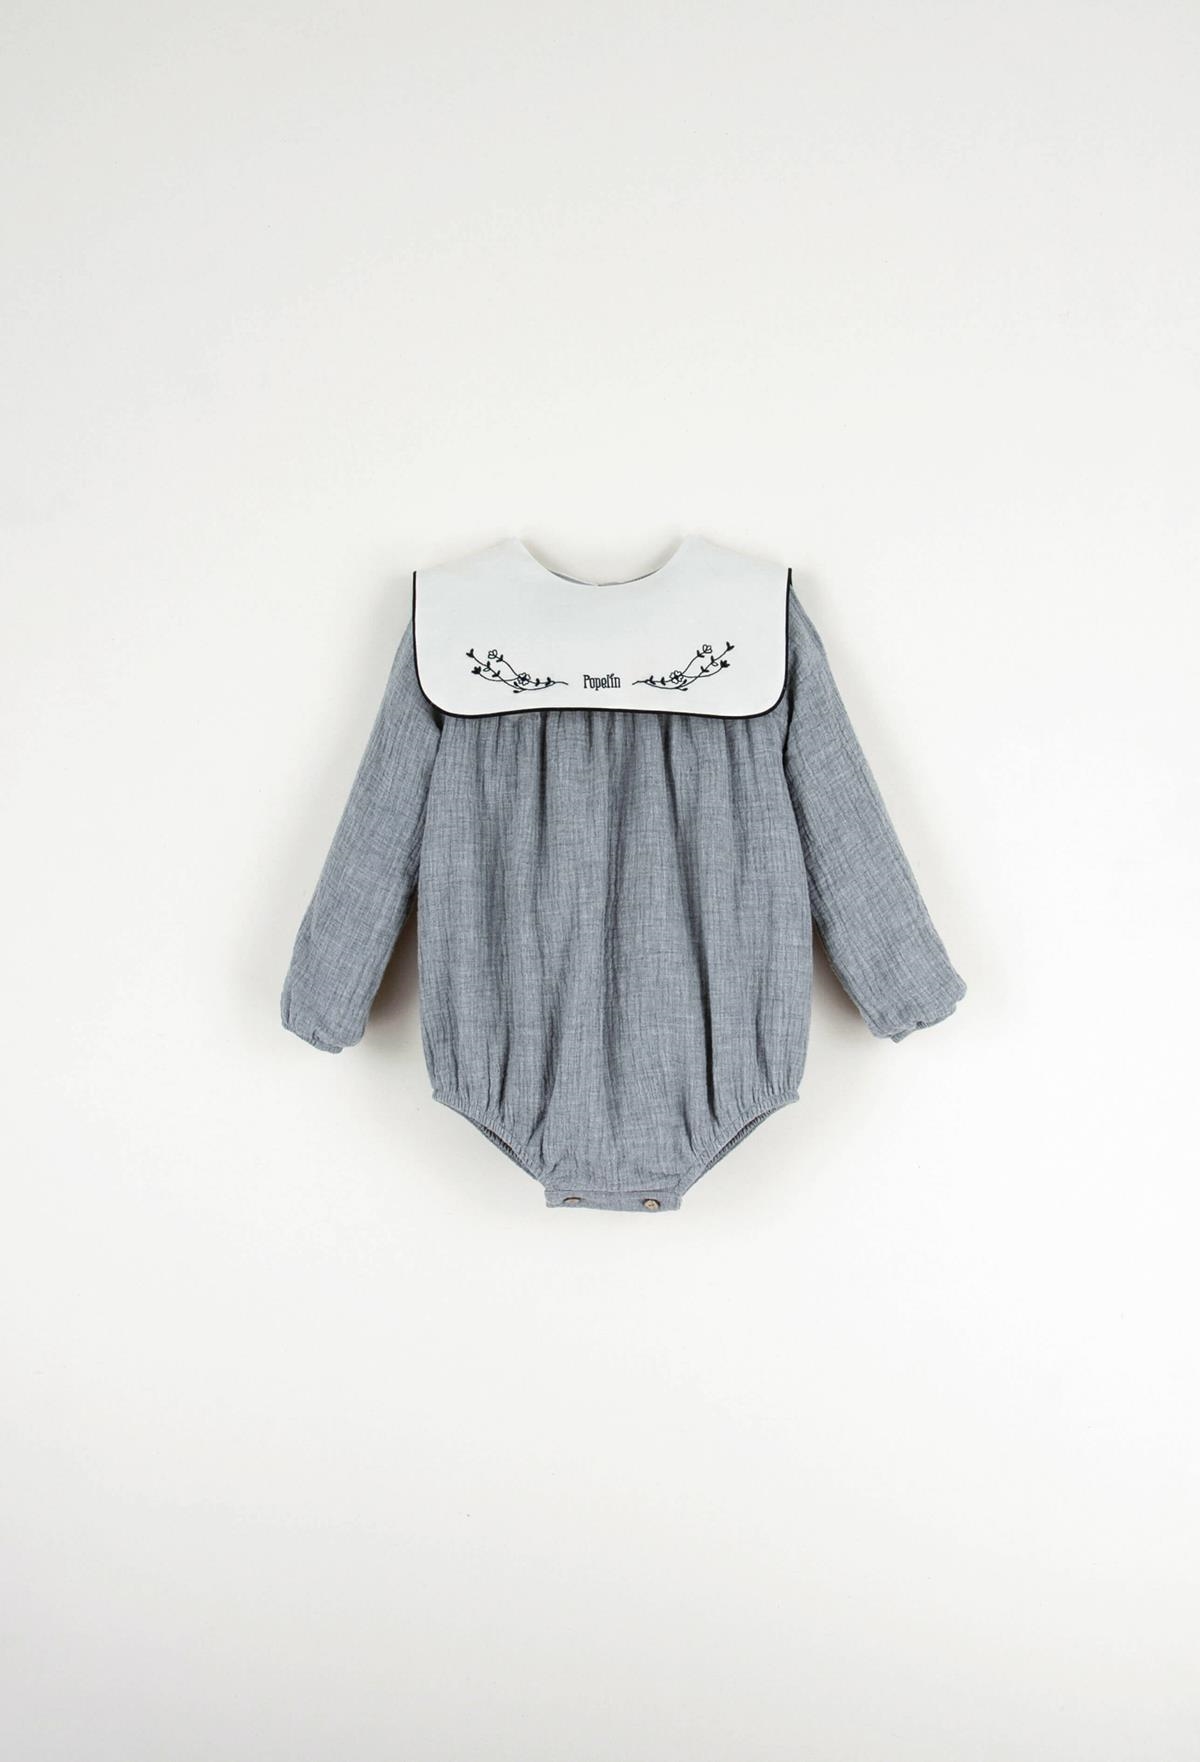 Mod.2.4 Light grey embroidered romper suit with yoke in organic fabric | AW22.23 Mod.2.4 Light grey embroidered romper suit with yoke in organic fabric